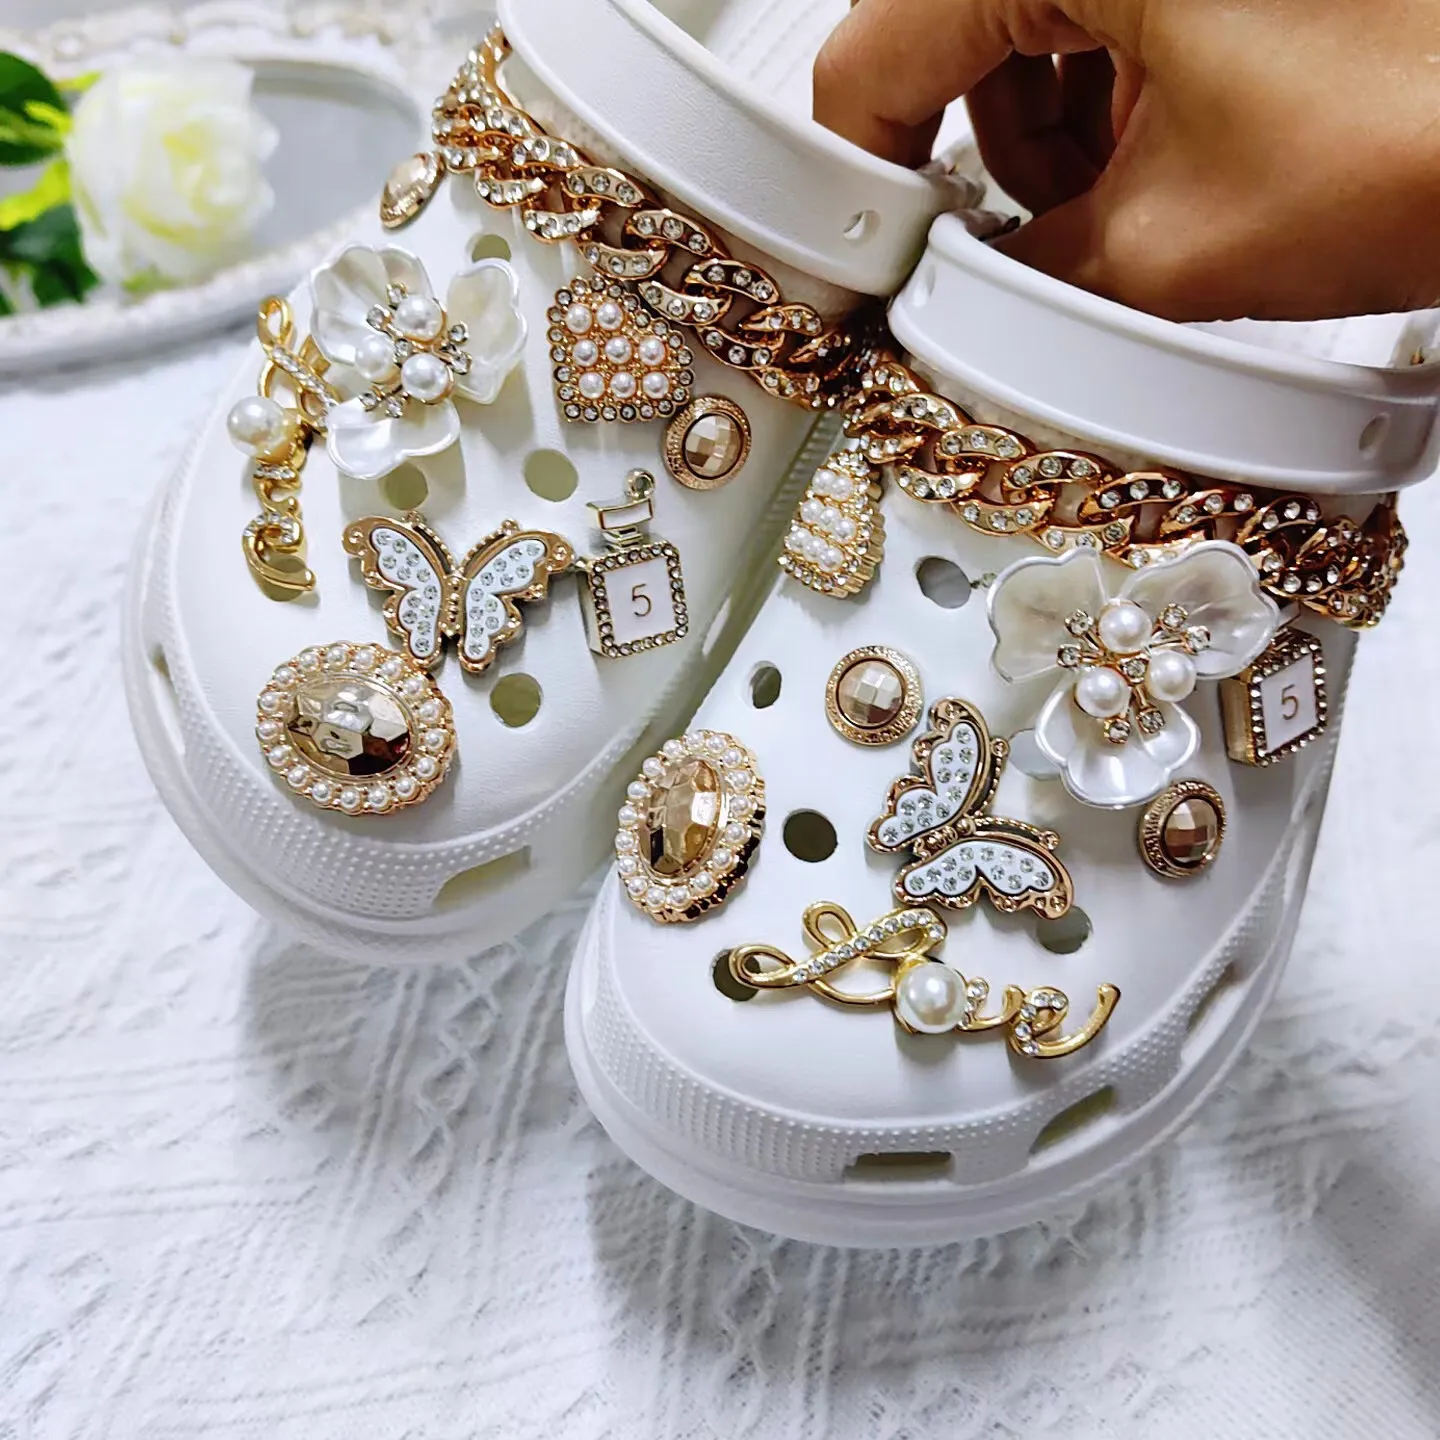 Wholesale Rhinestone Pearl Shoe Croc Bling Charms Set For Crocs Perfect For  Clogs And Pins From Yanming1113, $3.25